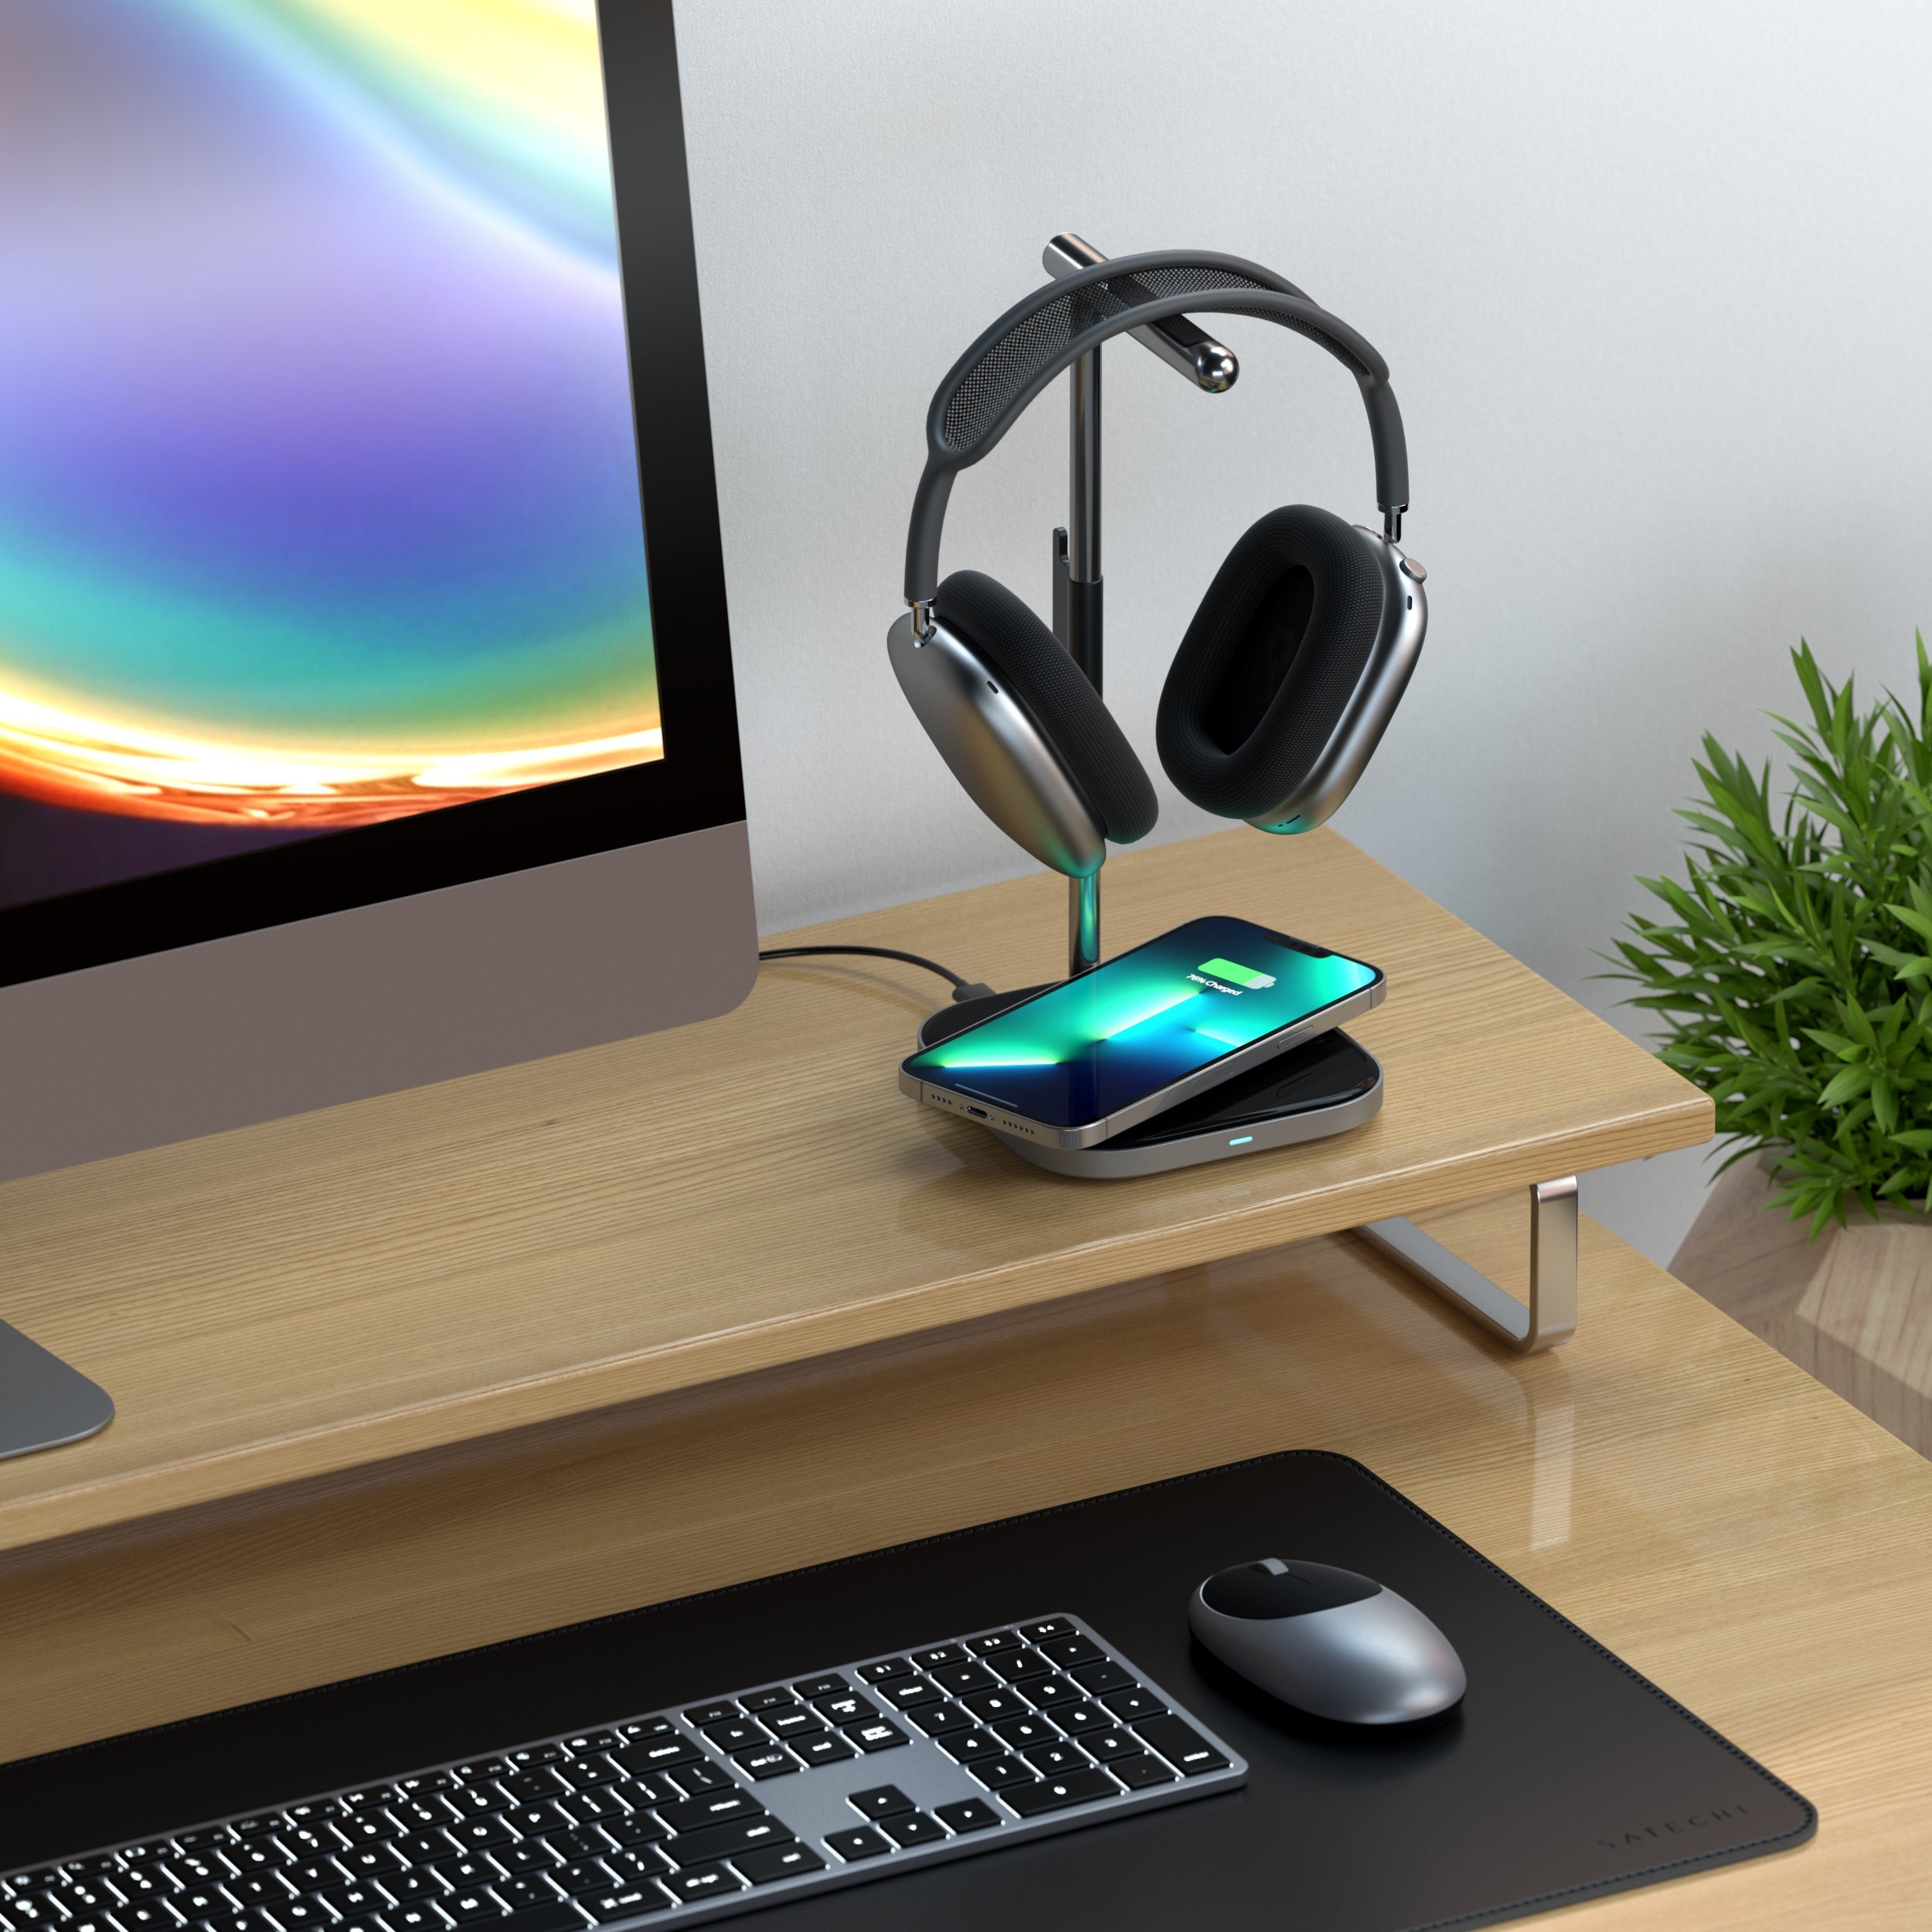 2-in-1 Headphone Stand with Wireless Charger Stands ## Chargers ## Wireless Chargers Satechi 